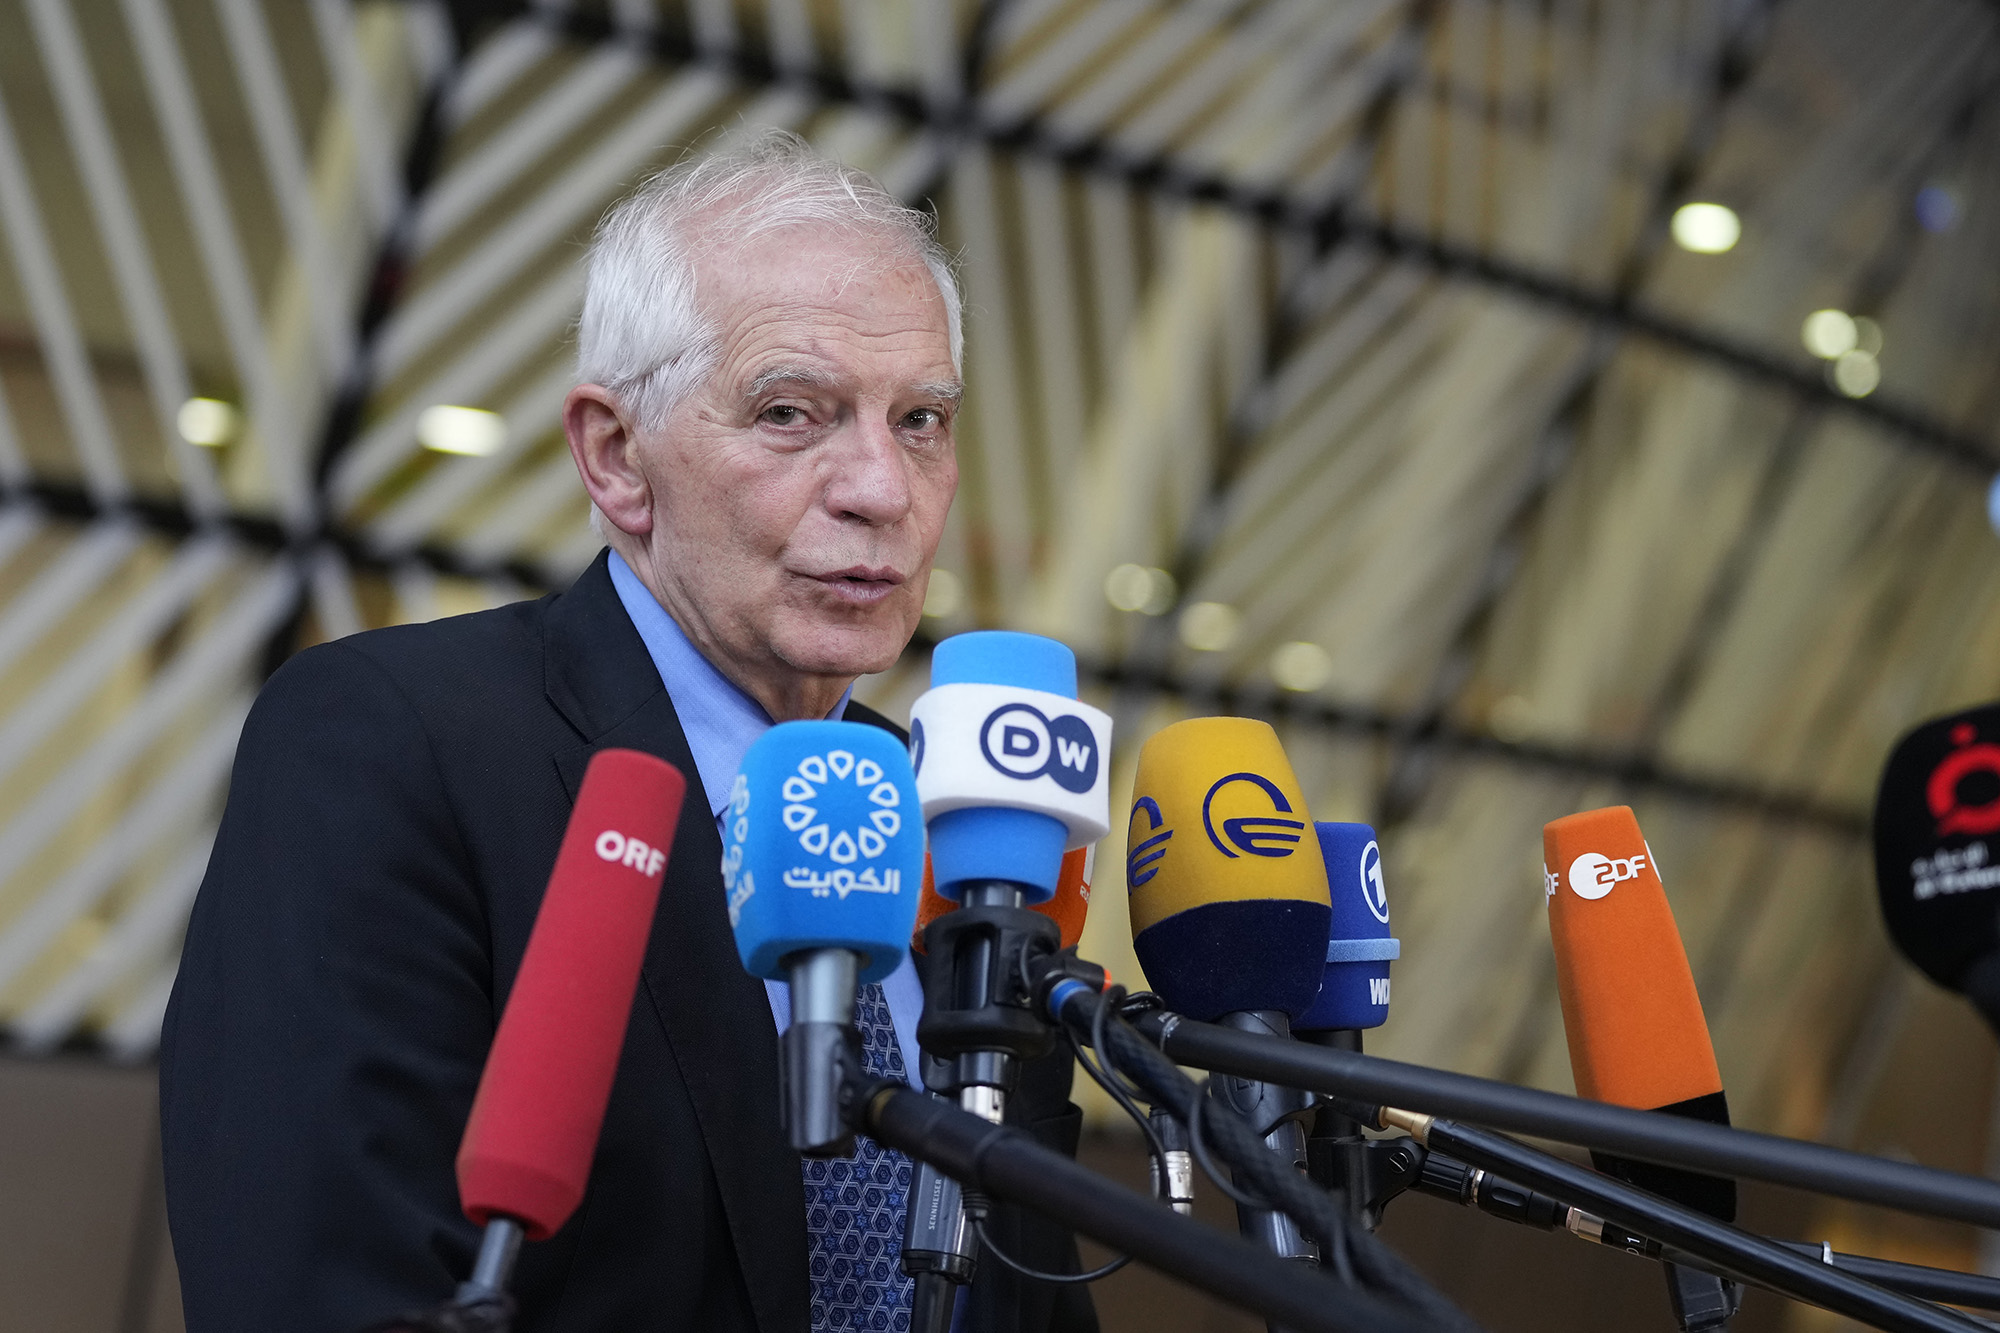 European Union foreign policy chief Josep Borrell speaks to the media as he arrives for a meeting of EU foreign ministers at the European Council building in Brussels, Belgium, on March 20 .